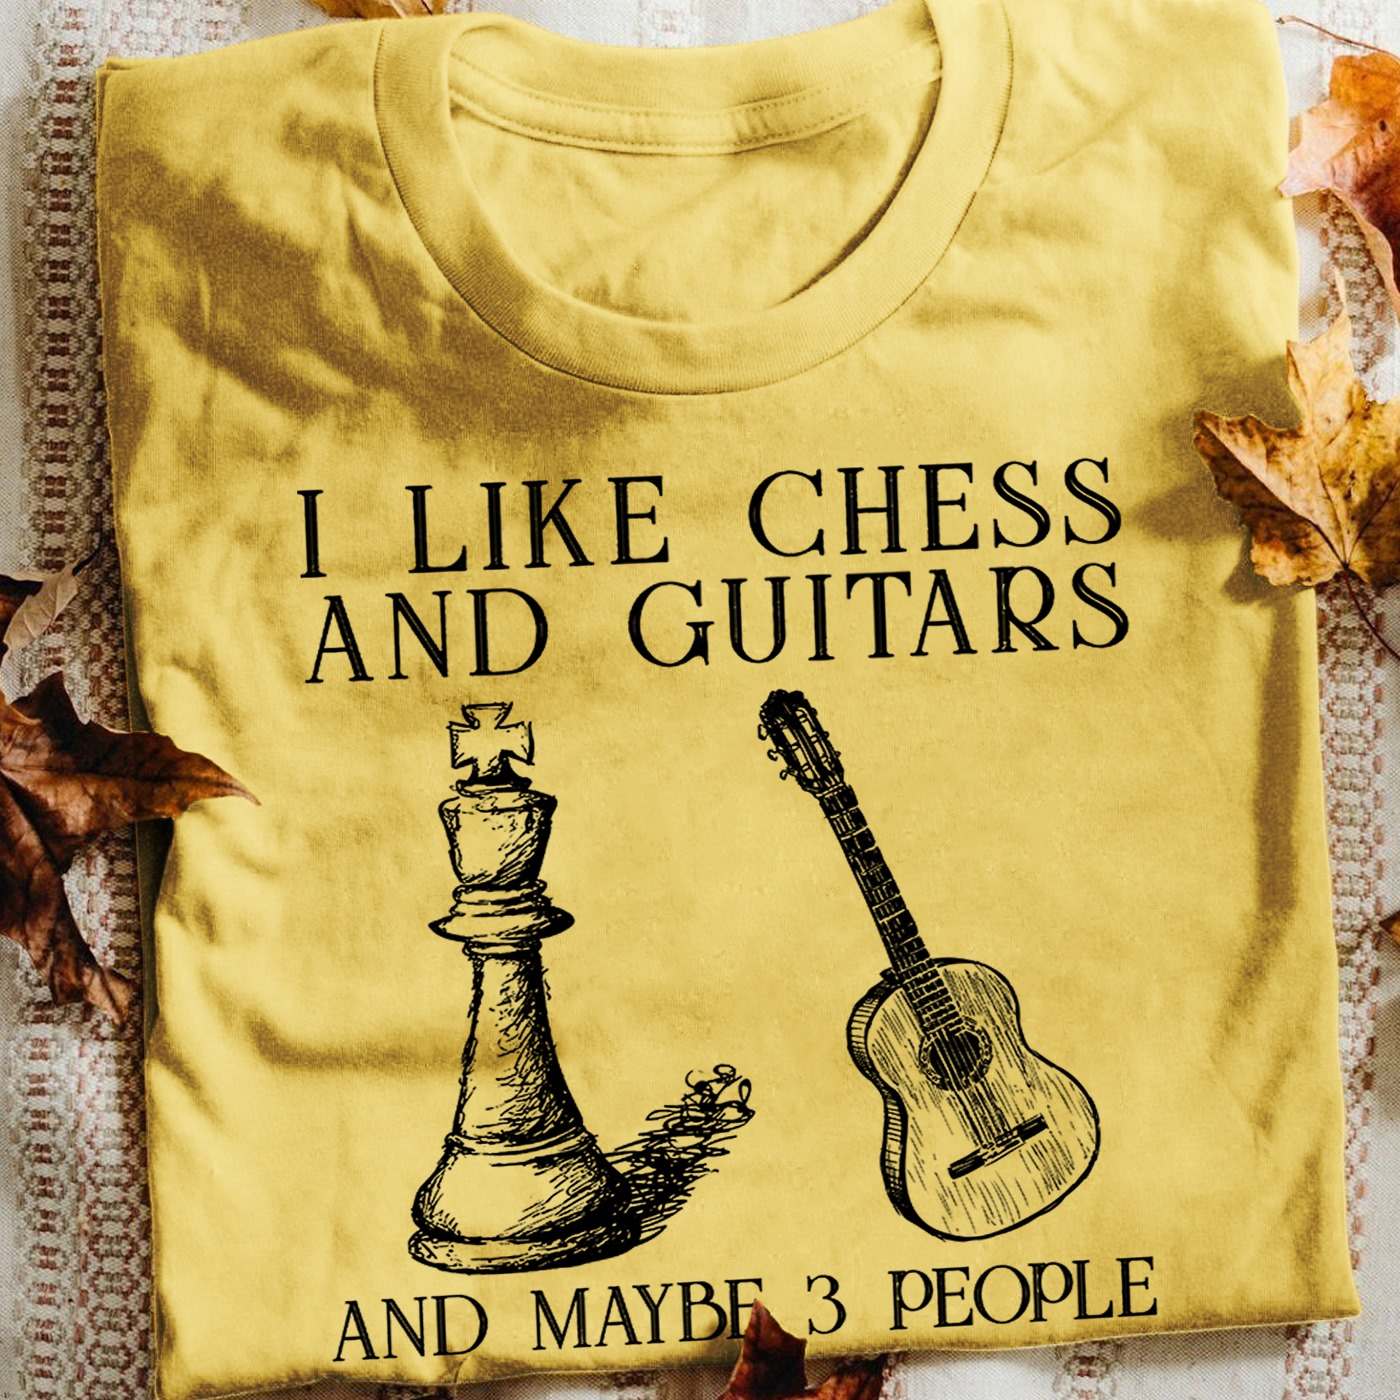 I like chess and guitars and maybe 3 people - Love playing chess